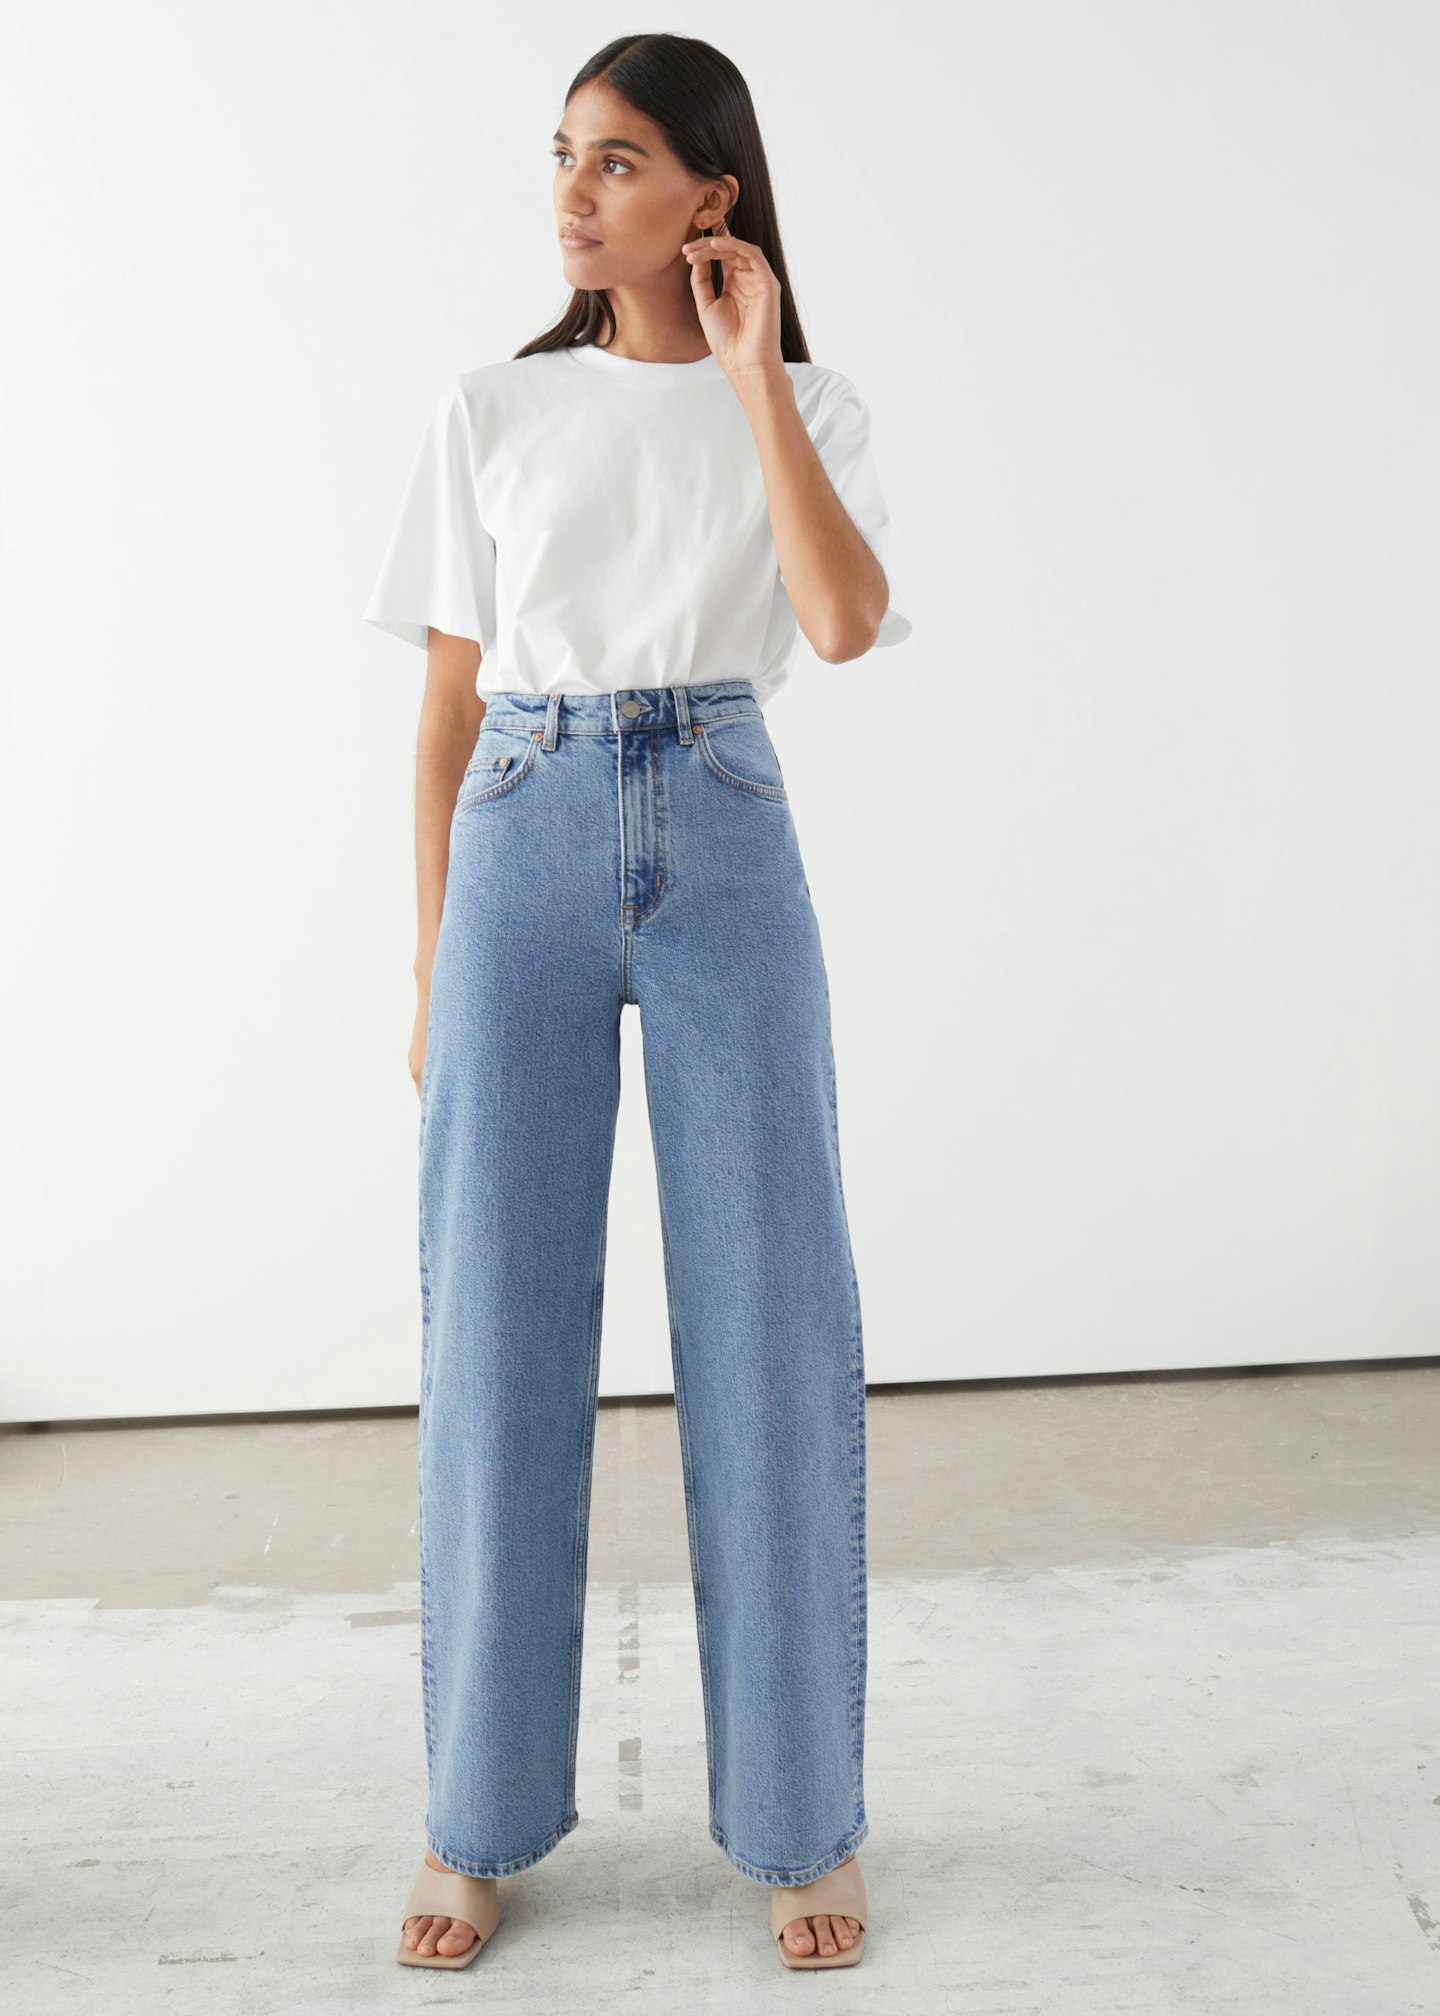 & Other Stories, Relaxed High Rise Jean, £65